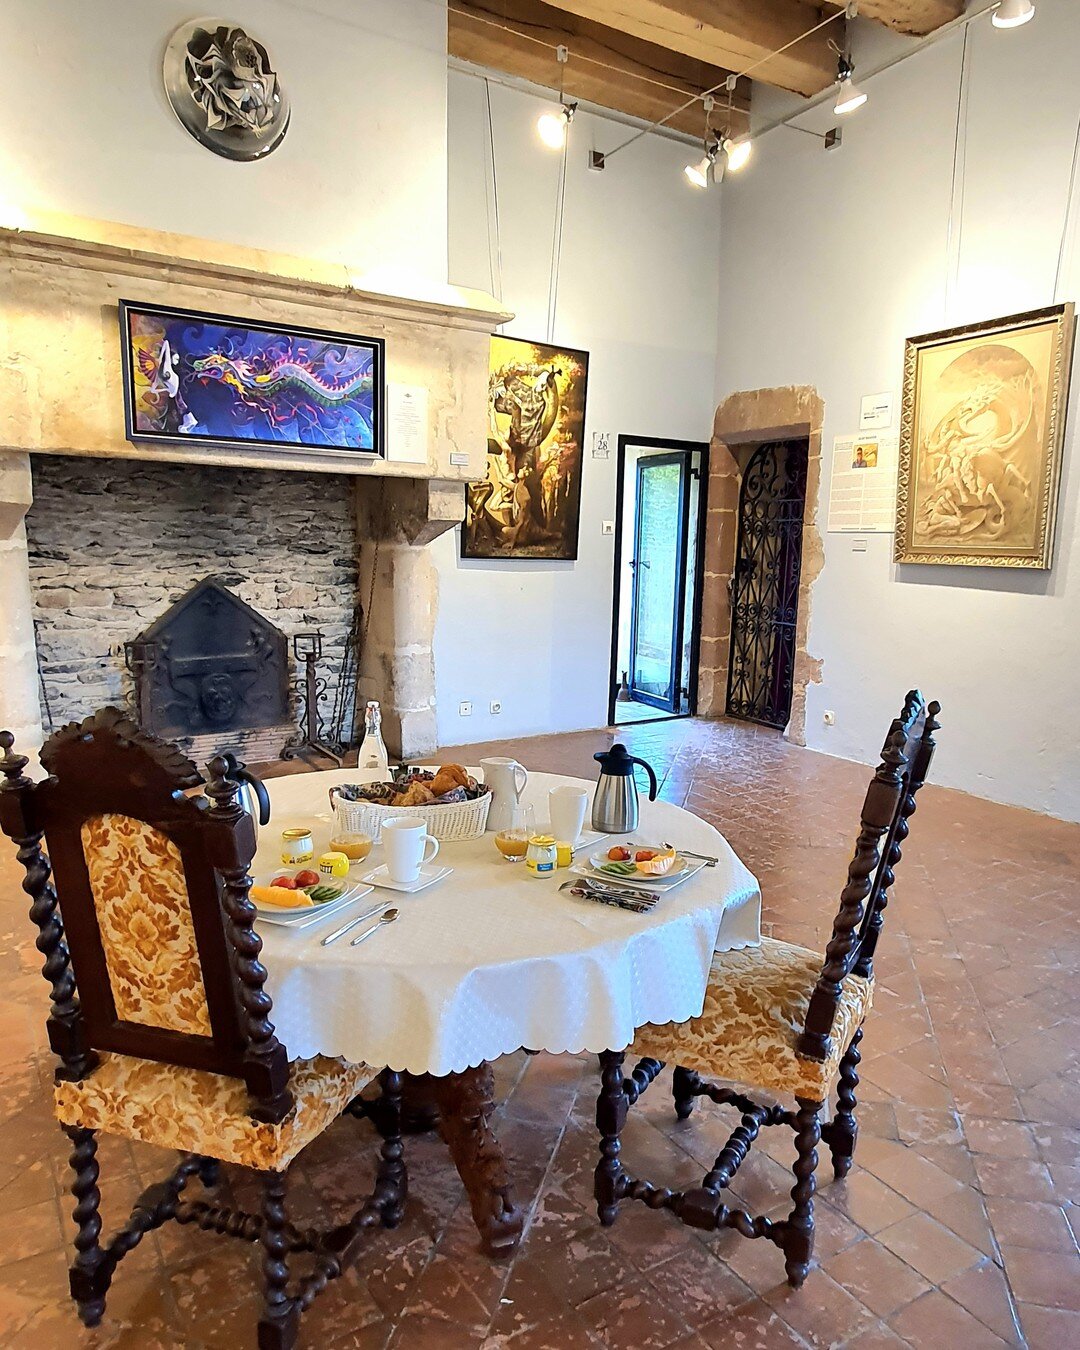 Breakfast in an Art Gallery&hellip; Quite unique, isn&rsquo;t it? 👀 Only at Ch&acirc;teau Belcastel, France 🏰

#chateaubelcastel #breakfastgoals #artgallery #artexhibition @travelanddestinations #travelcouple #travelworld #travellovers #travelislif